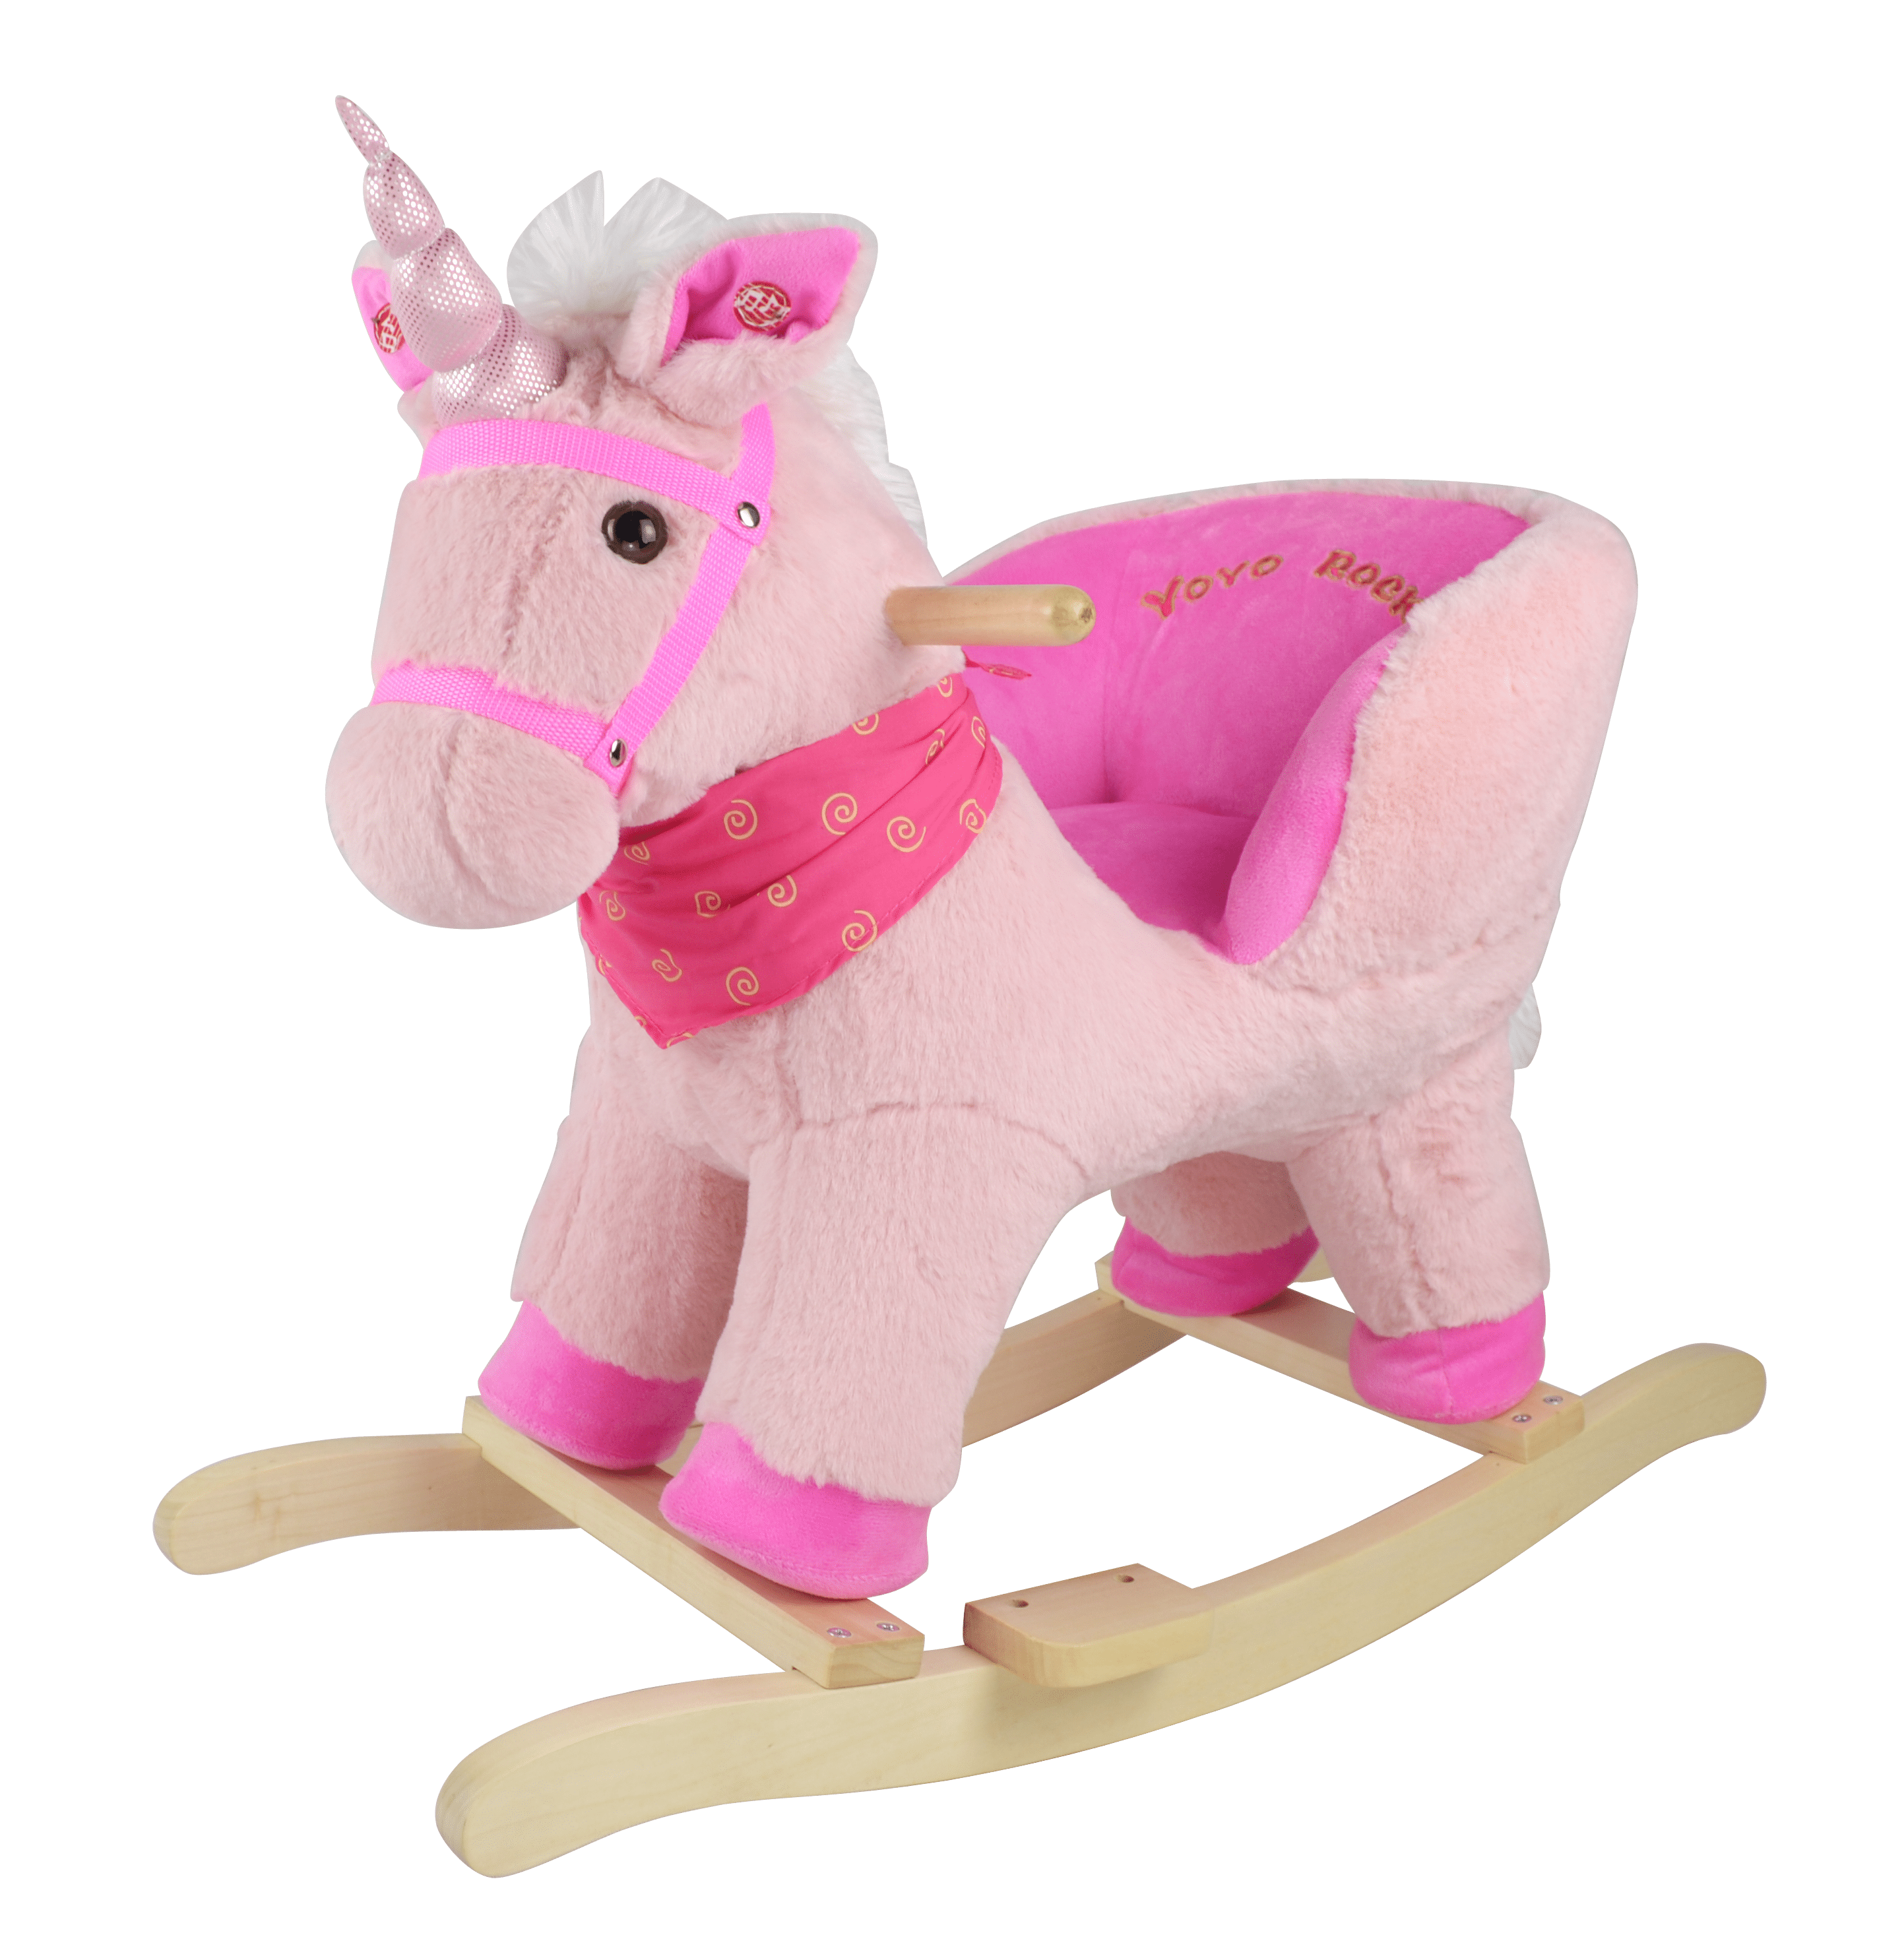 4-in-1 Rocking Horse Kids Gift Cute Walking Ride On Baby Toy w/Neigh Sound Pink 